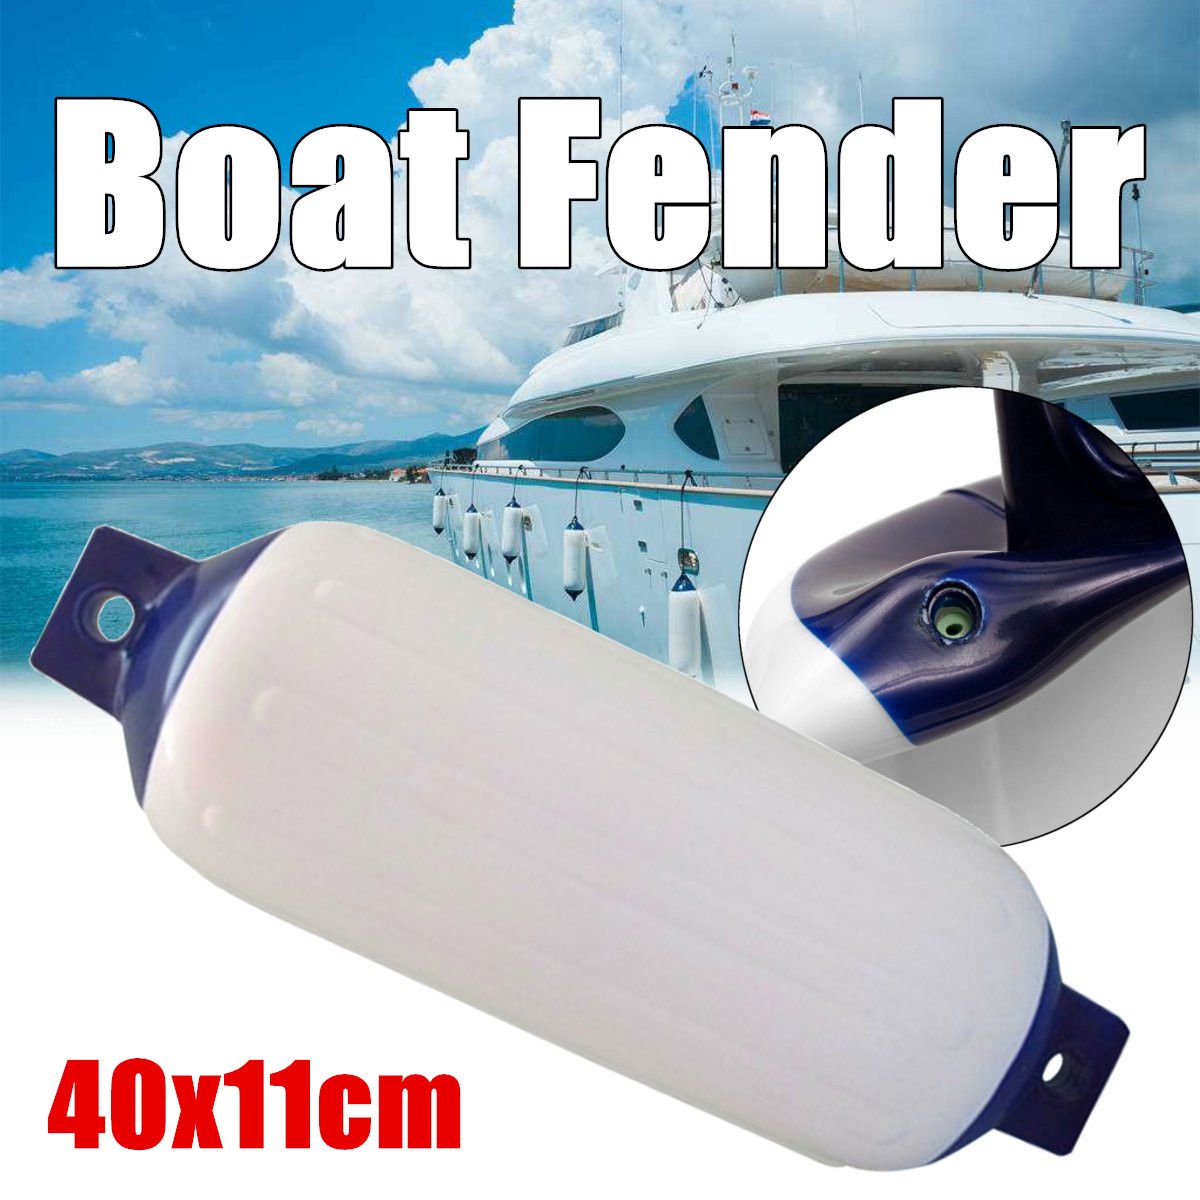 40x11cm-PVC-Boat-Marine-Buffer-Blue-Tip-Inflatable-Boat-Bumper-Dock-Shield-Protection-1304239